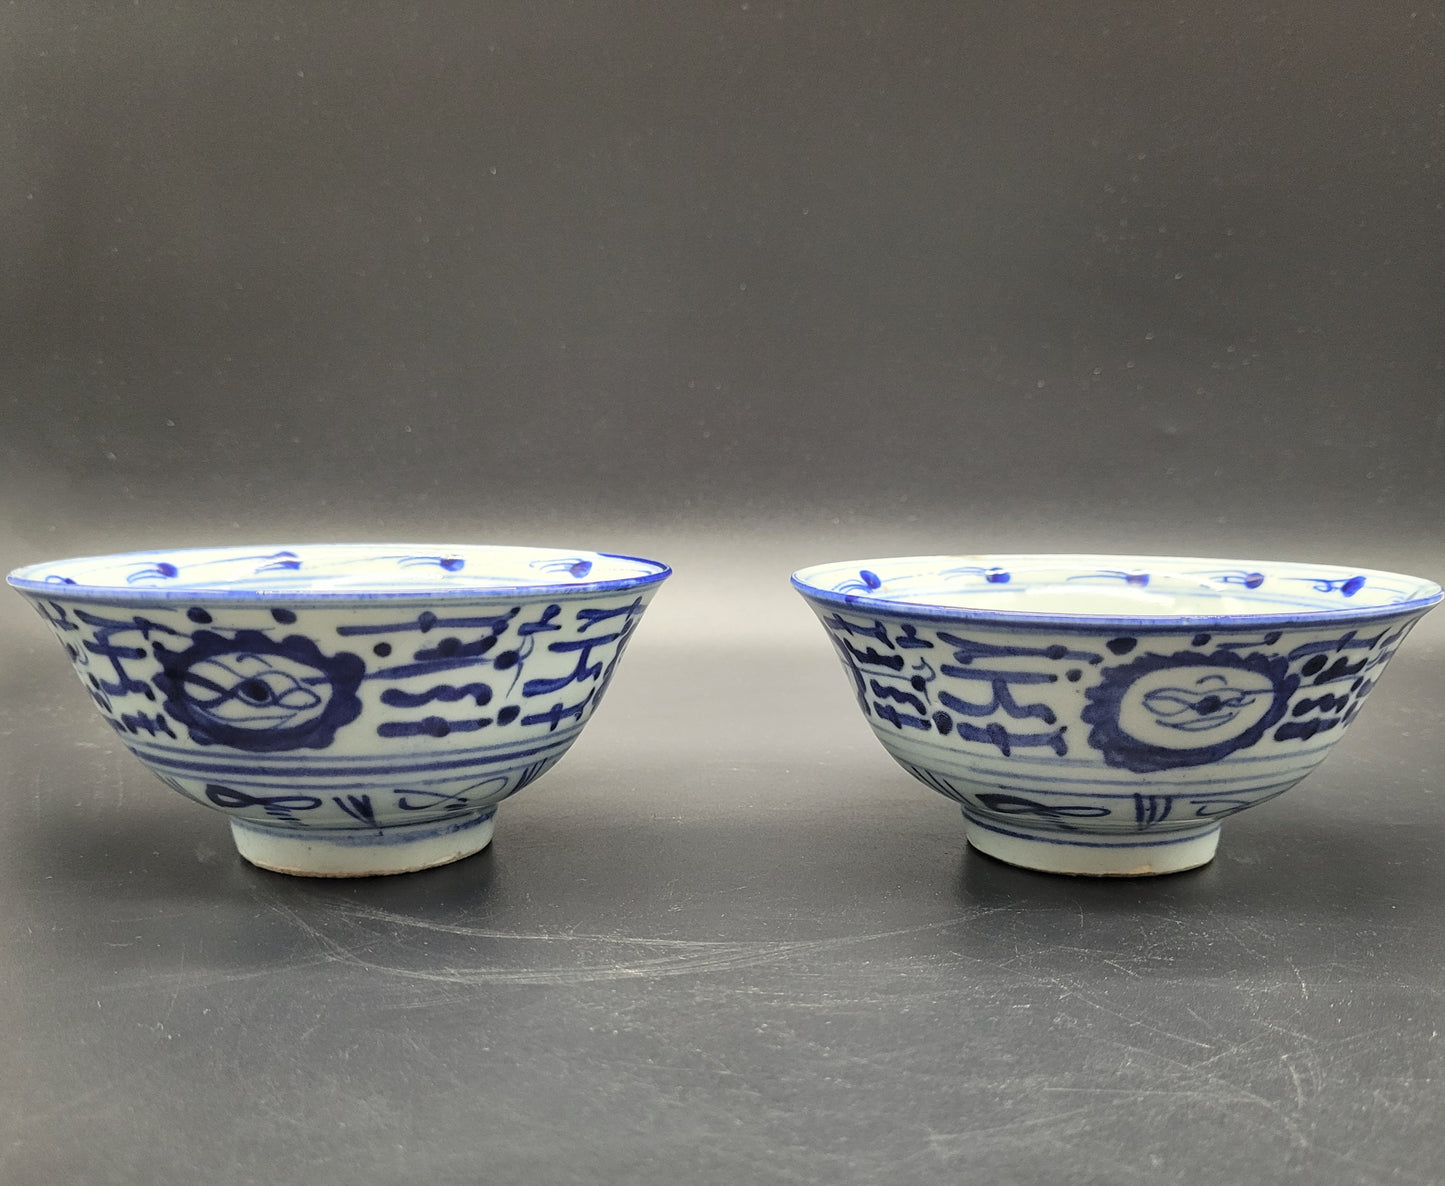 ANTIQUES & COLLECTABLES Two Chinese Qing Porcelain Bowls 18th Century Blue / White